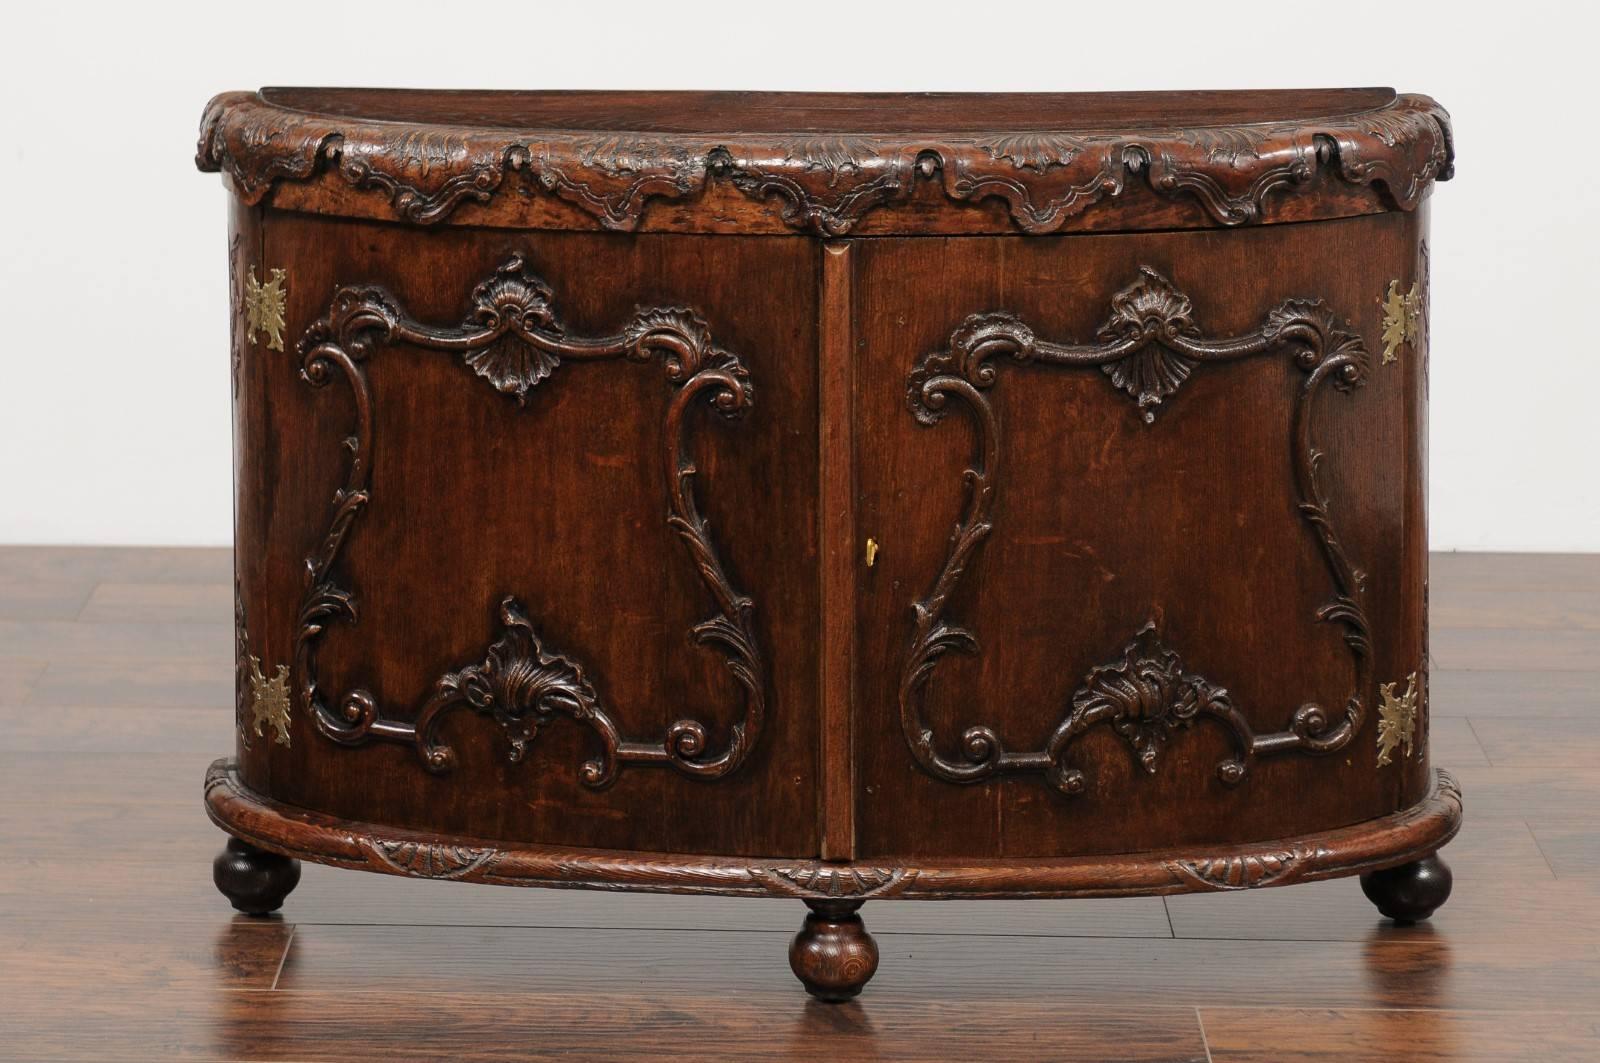 An Italian Rococo style hand-carved oak two-door demilune cabinet with cartouche motifs from the early 19th century. This Italian credenza features an exquisite semi-circular top, adorned in the front with carved foliage motifs. The demi-lune façade